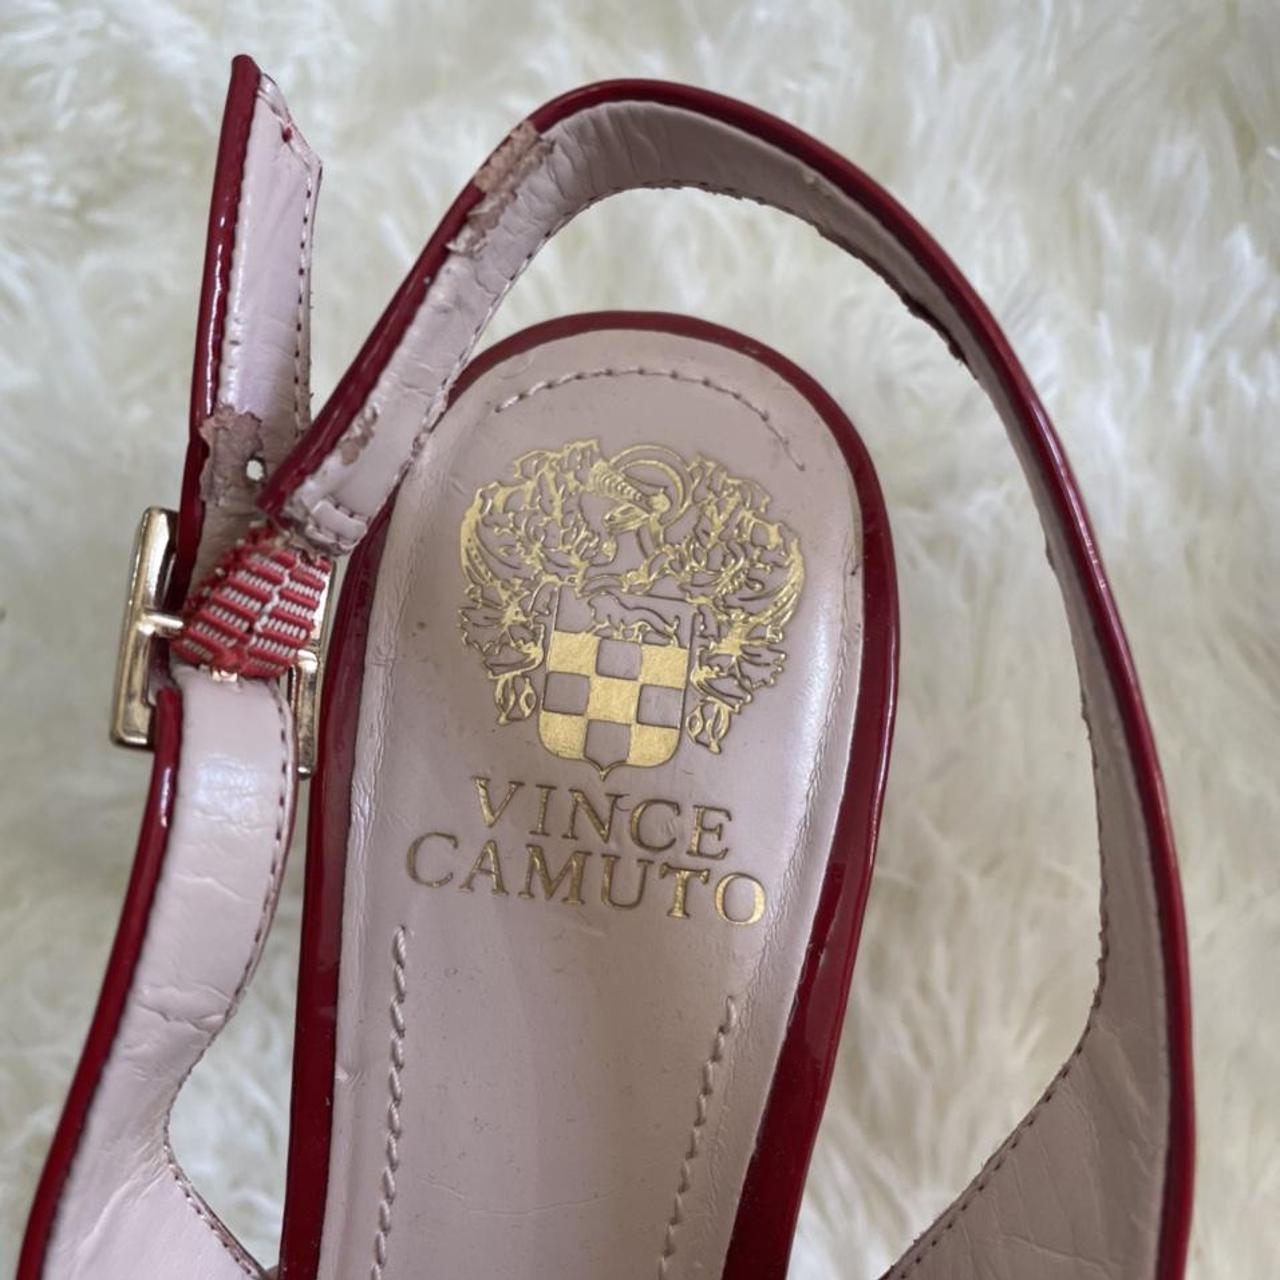 Vince Camuto Women's Red and Gold Courts (2)